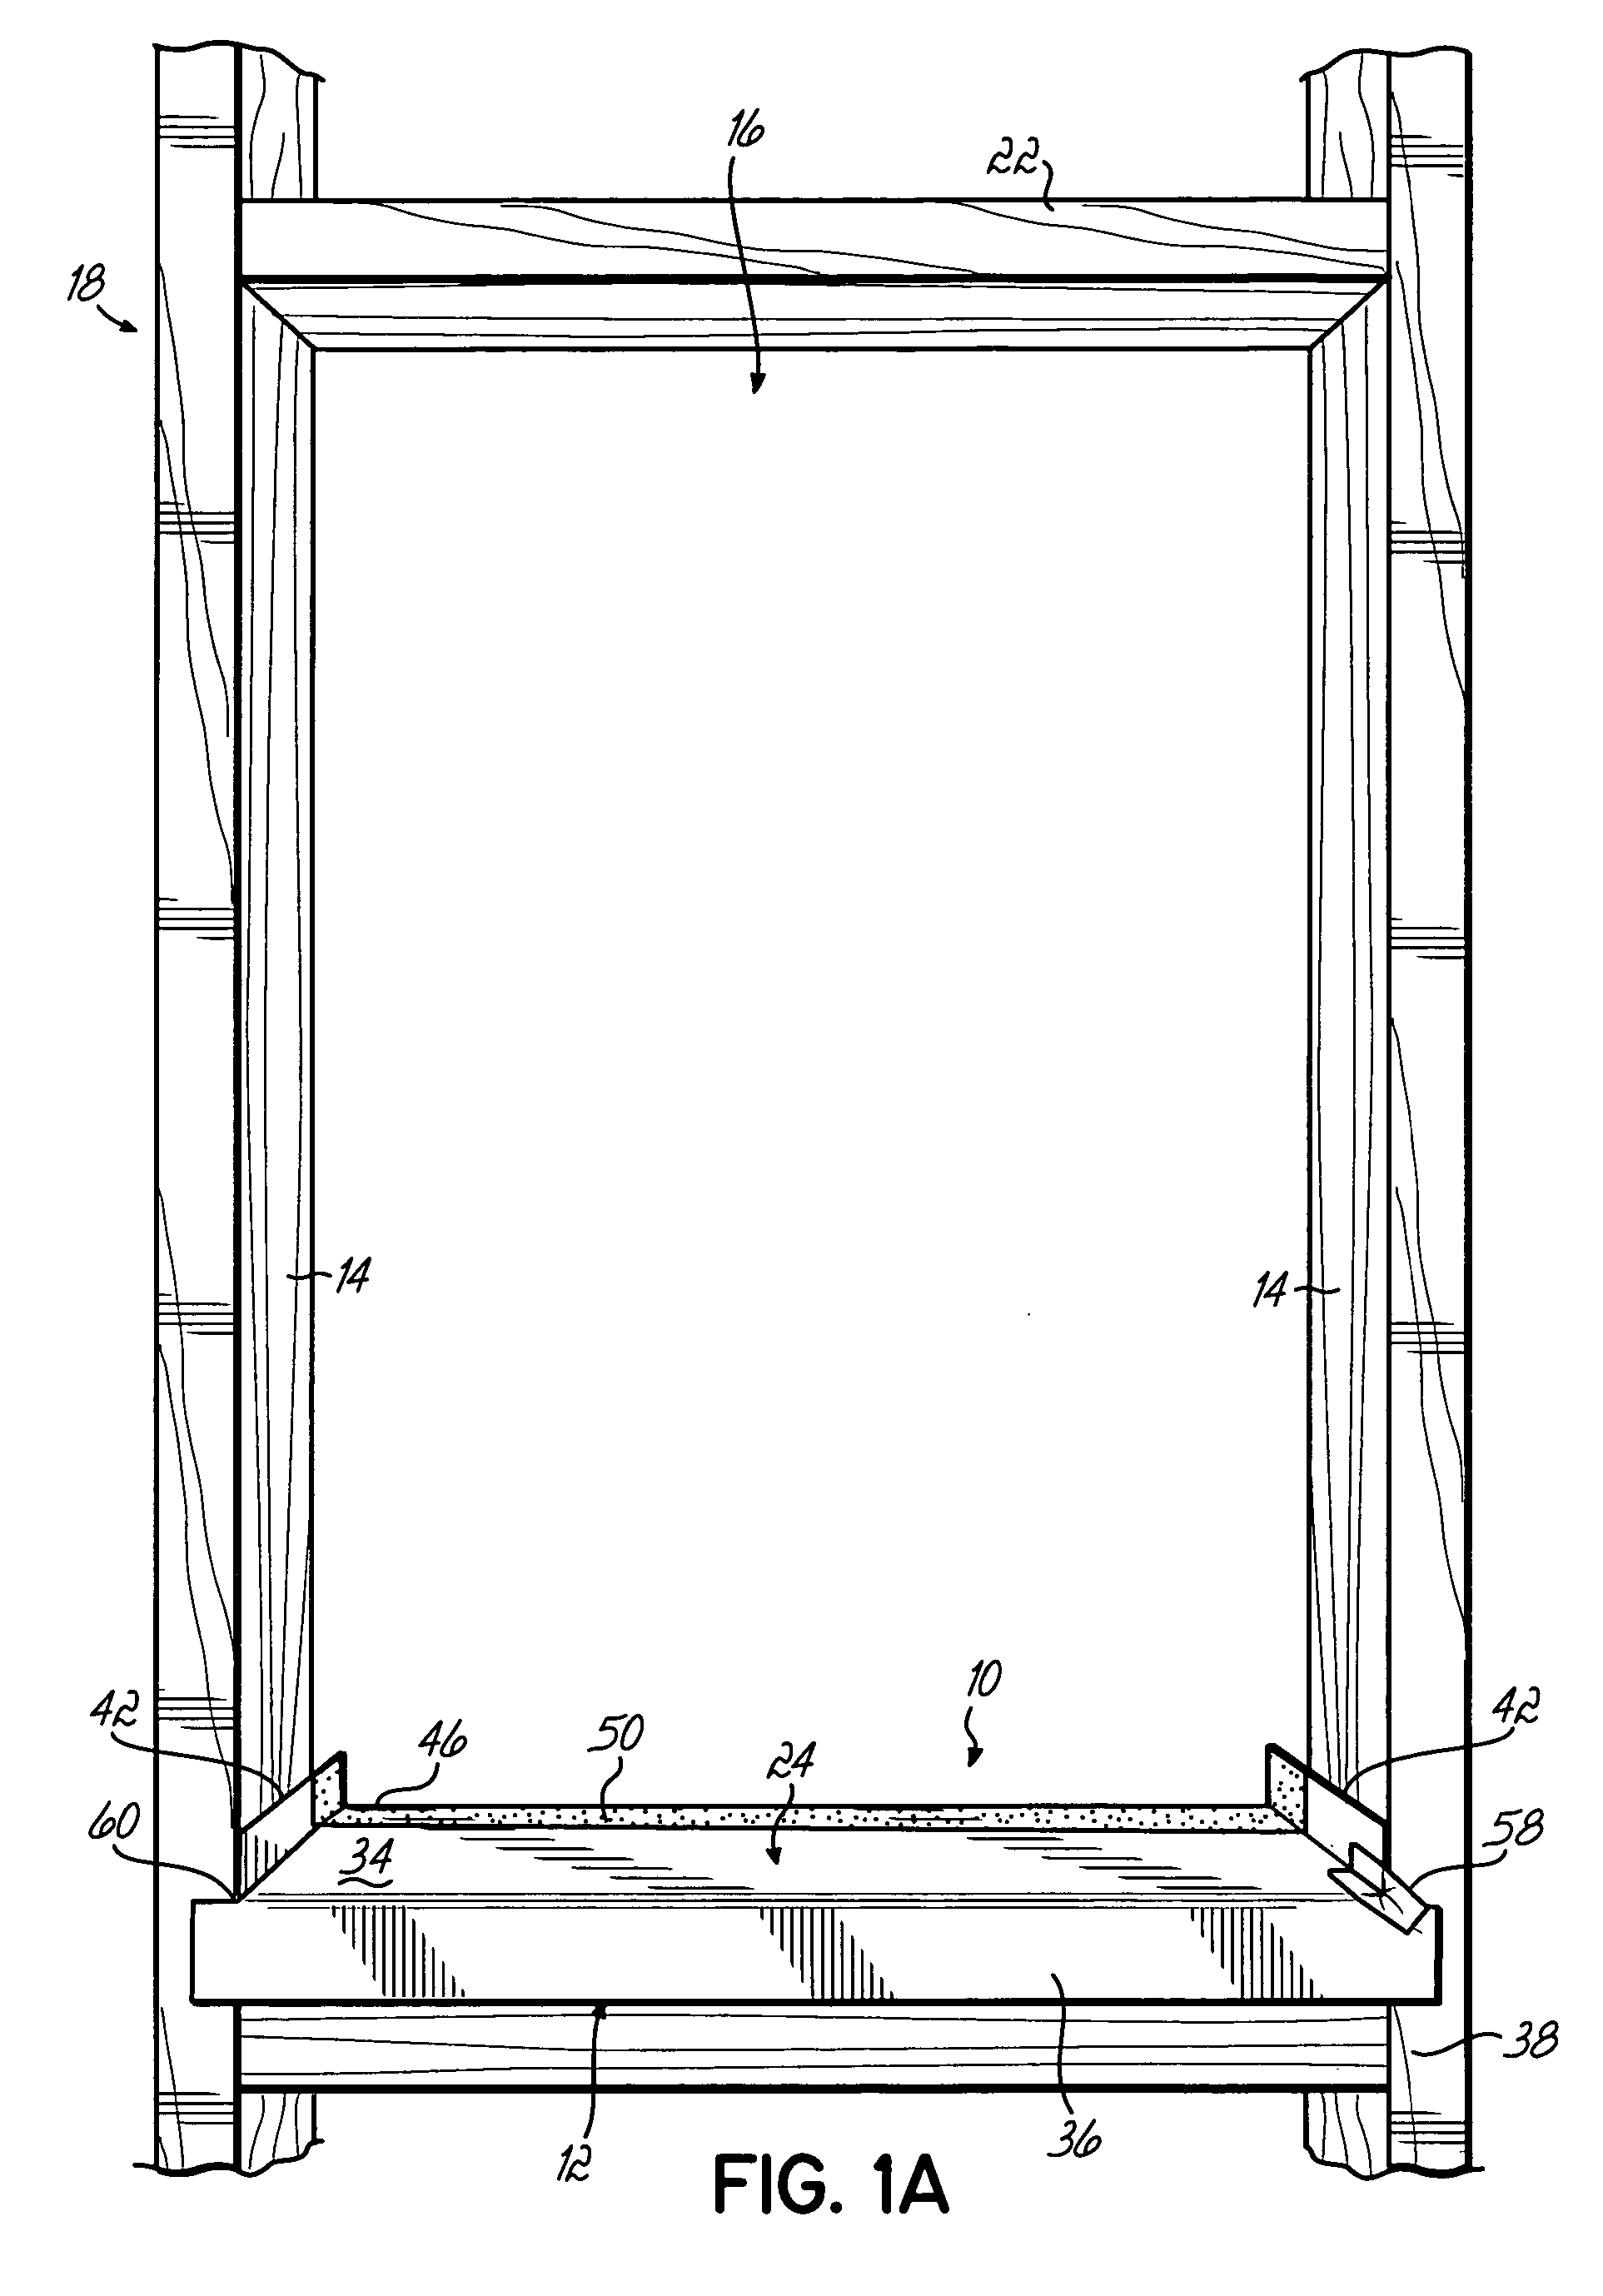 Sill pan flashing for doors and windows